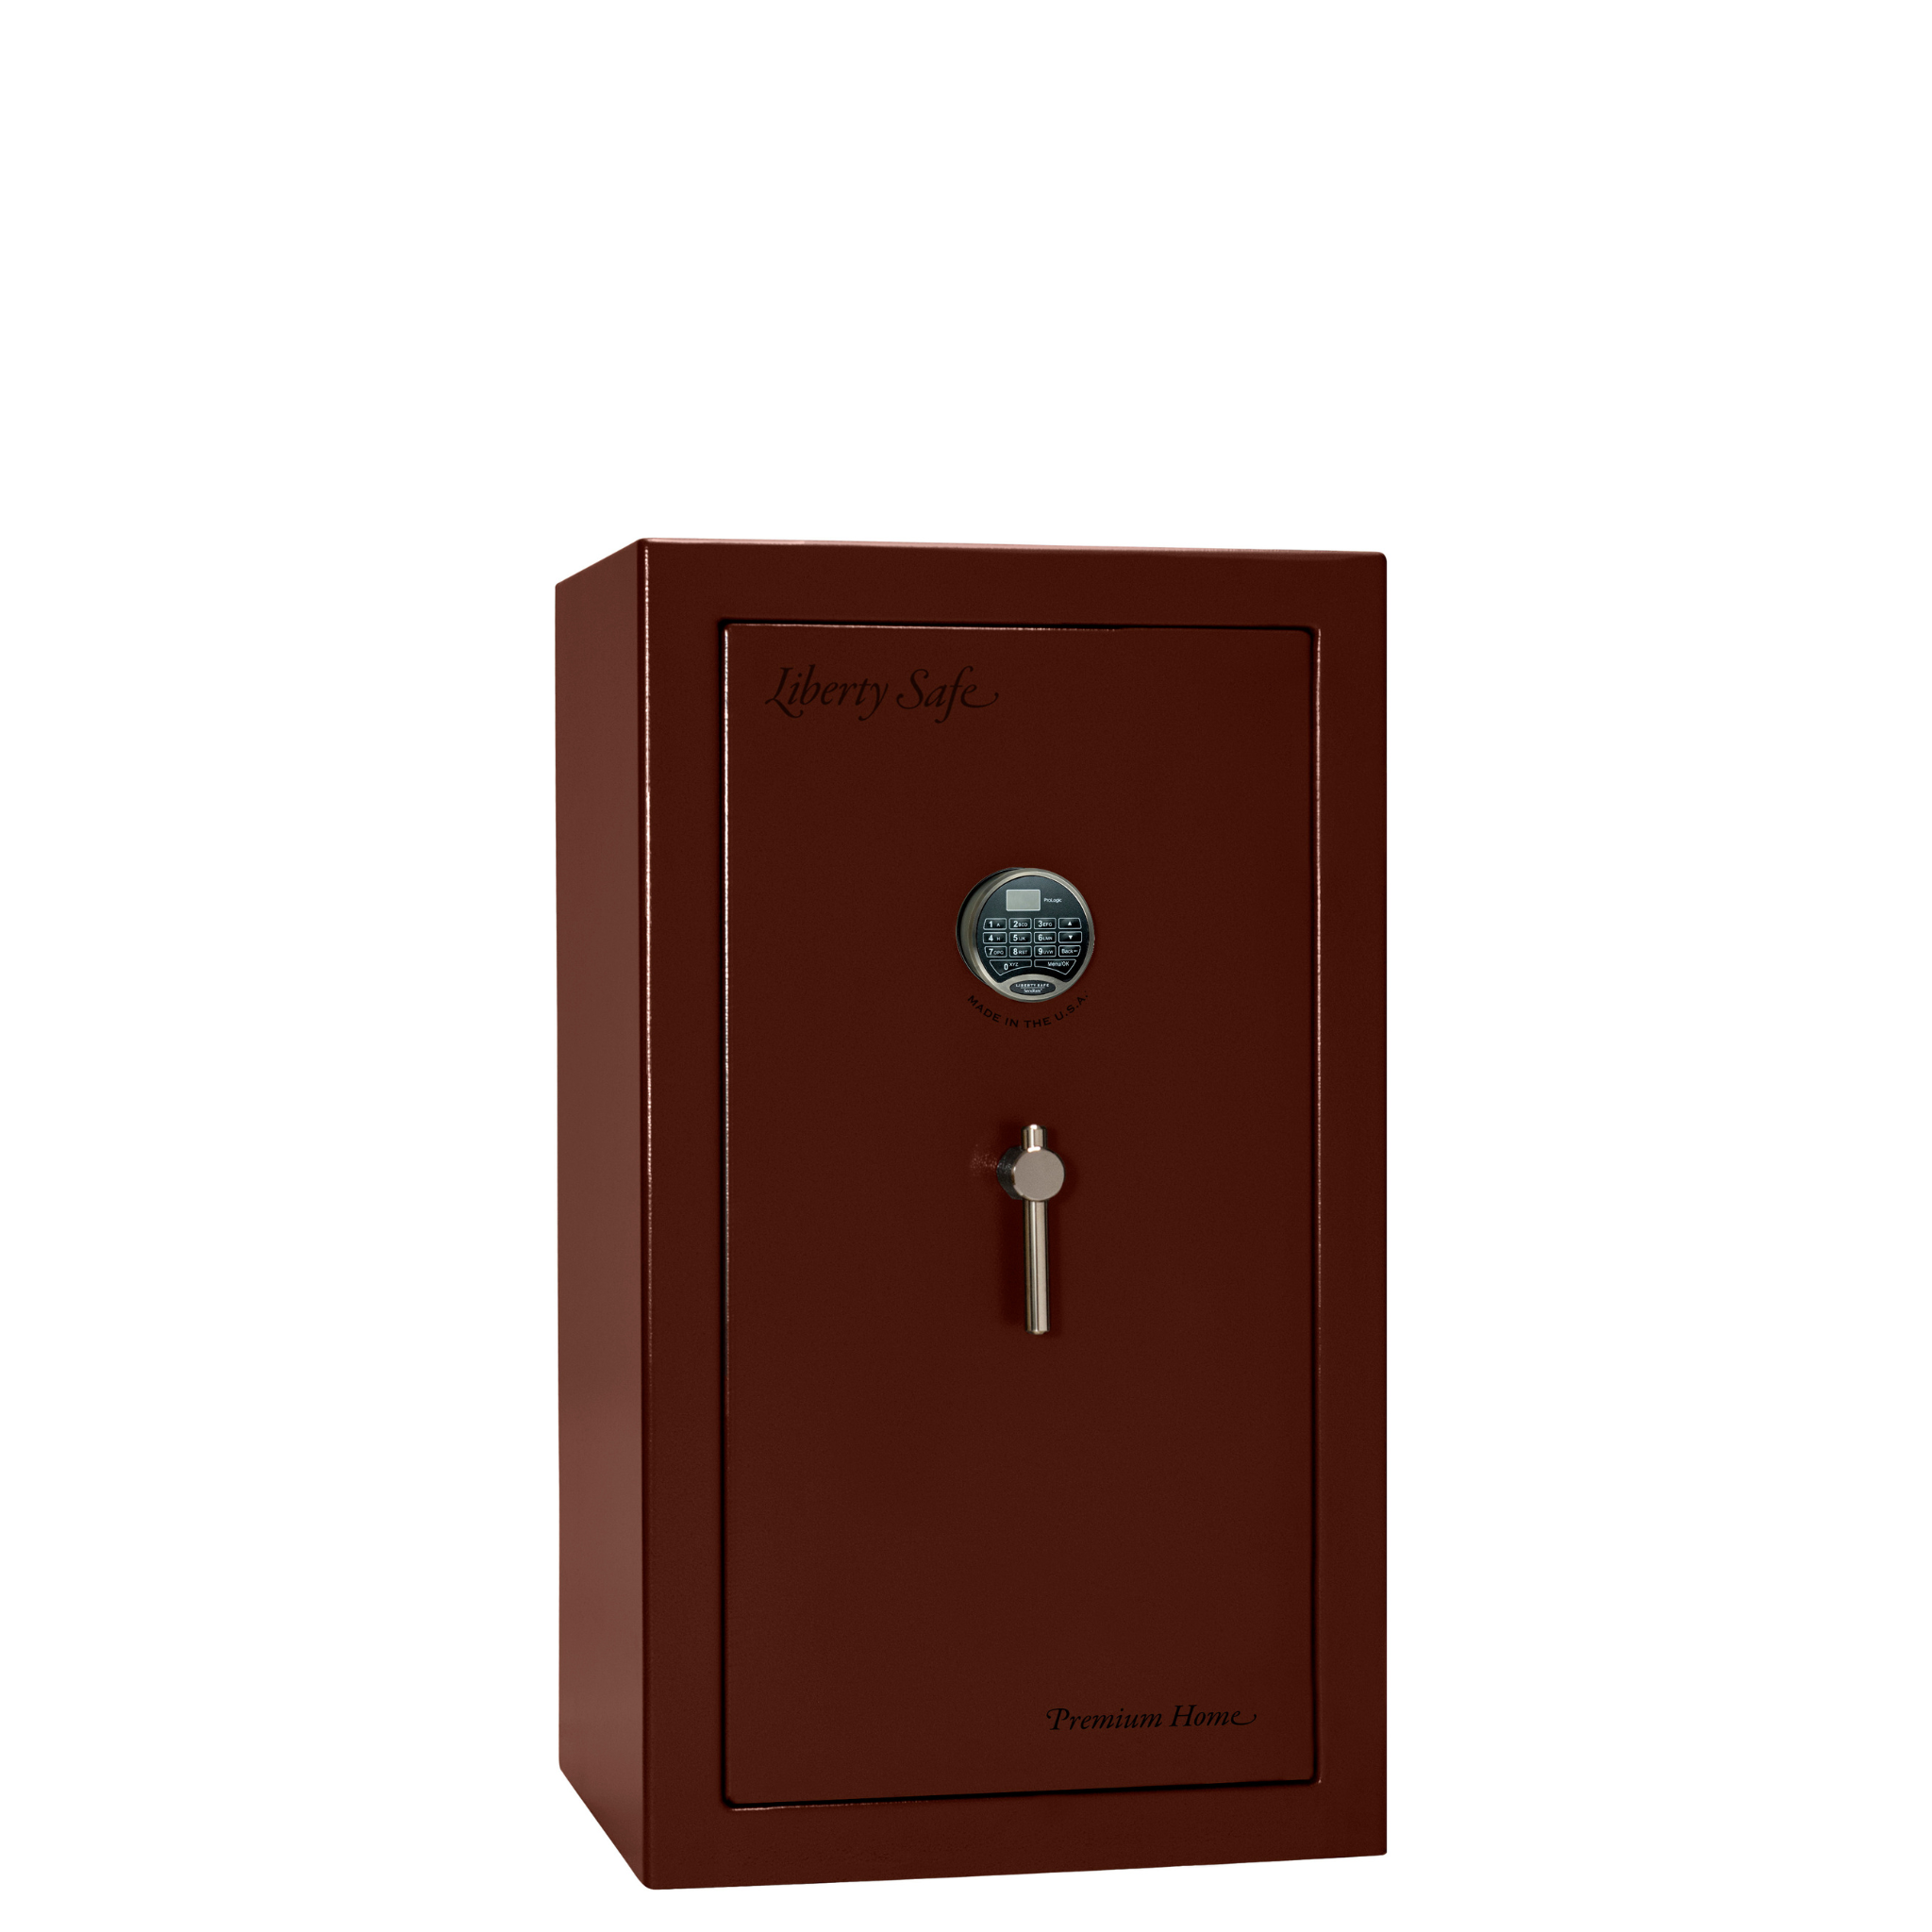 Premium Home Series | Level 7 Security | 2 Hour Fire Protection | 12 | Dimensions: 41.75"(H) x 24.5"(W) x 19"(D) | Burgundy Marble Black Chrome - Closed Door